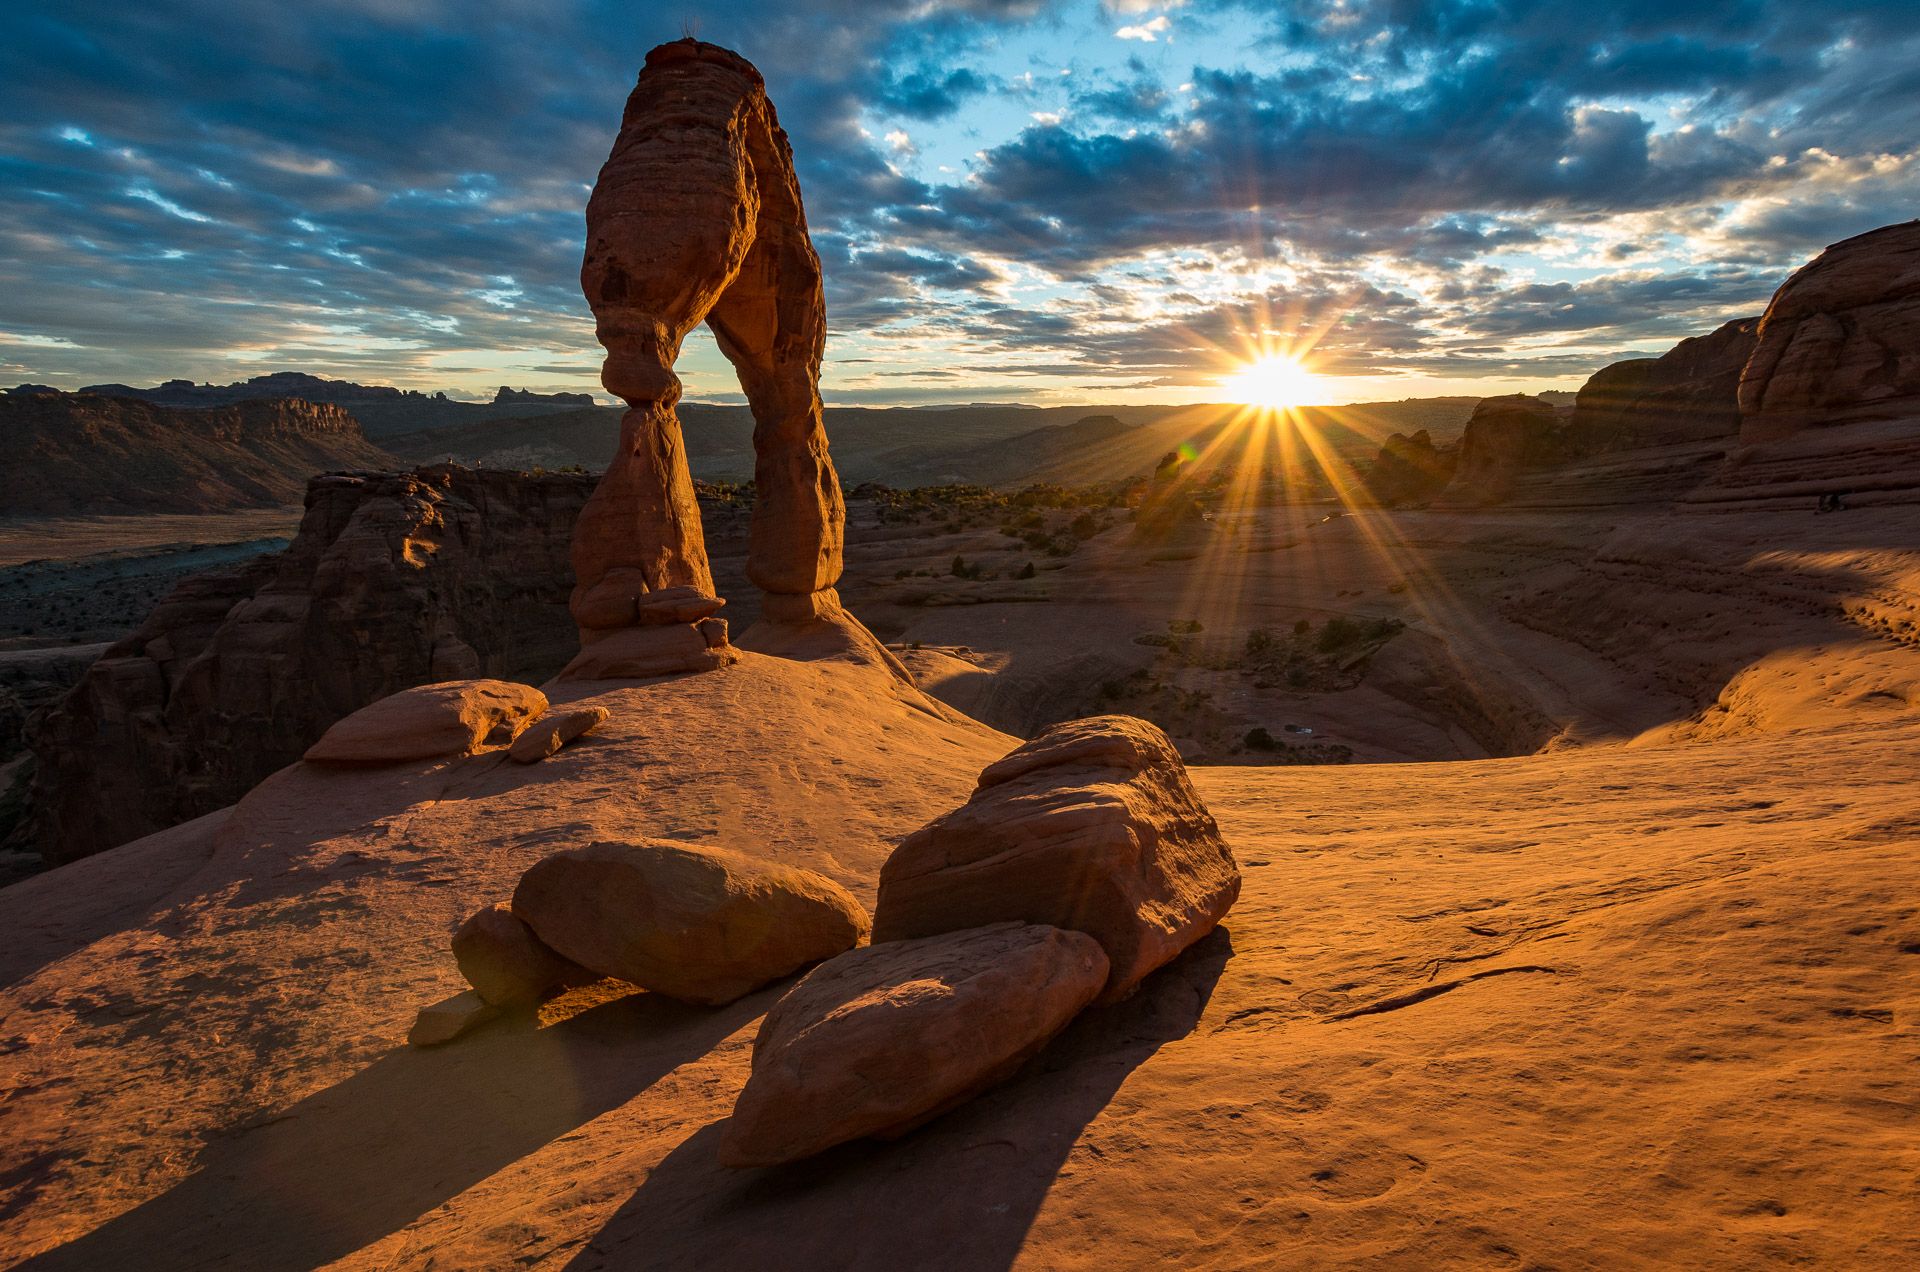 Sunset at Delicate Arch